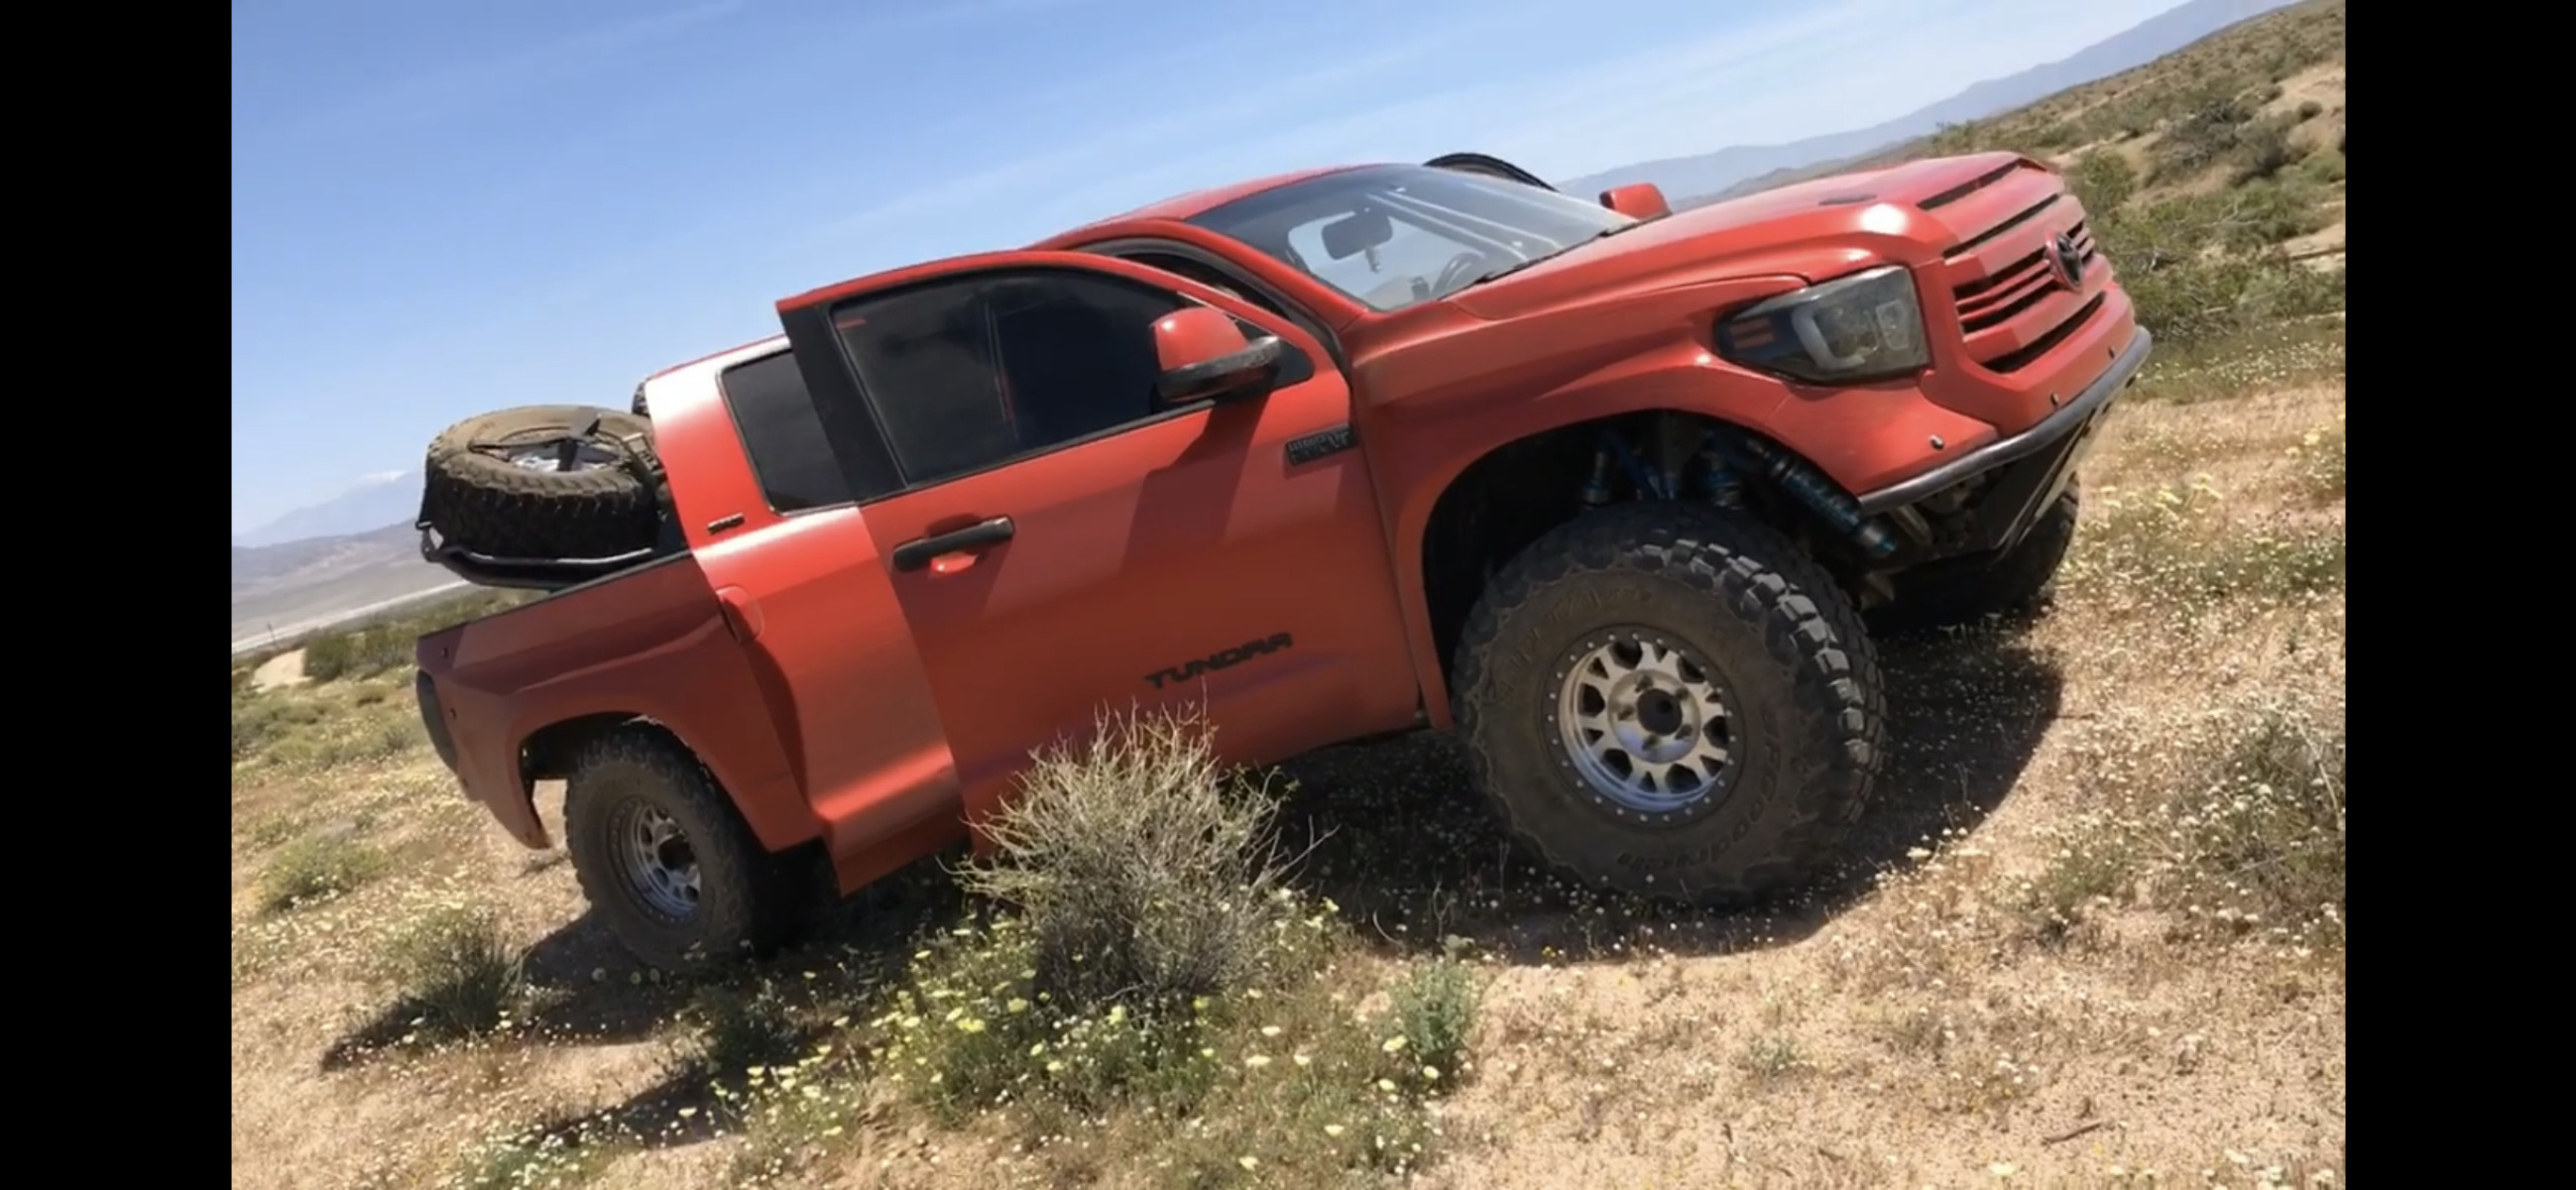 For Sale: Toyota Tundra Prerunner **PRICE REDUCED** - photo16